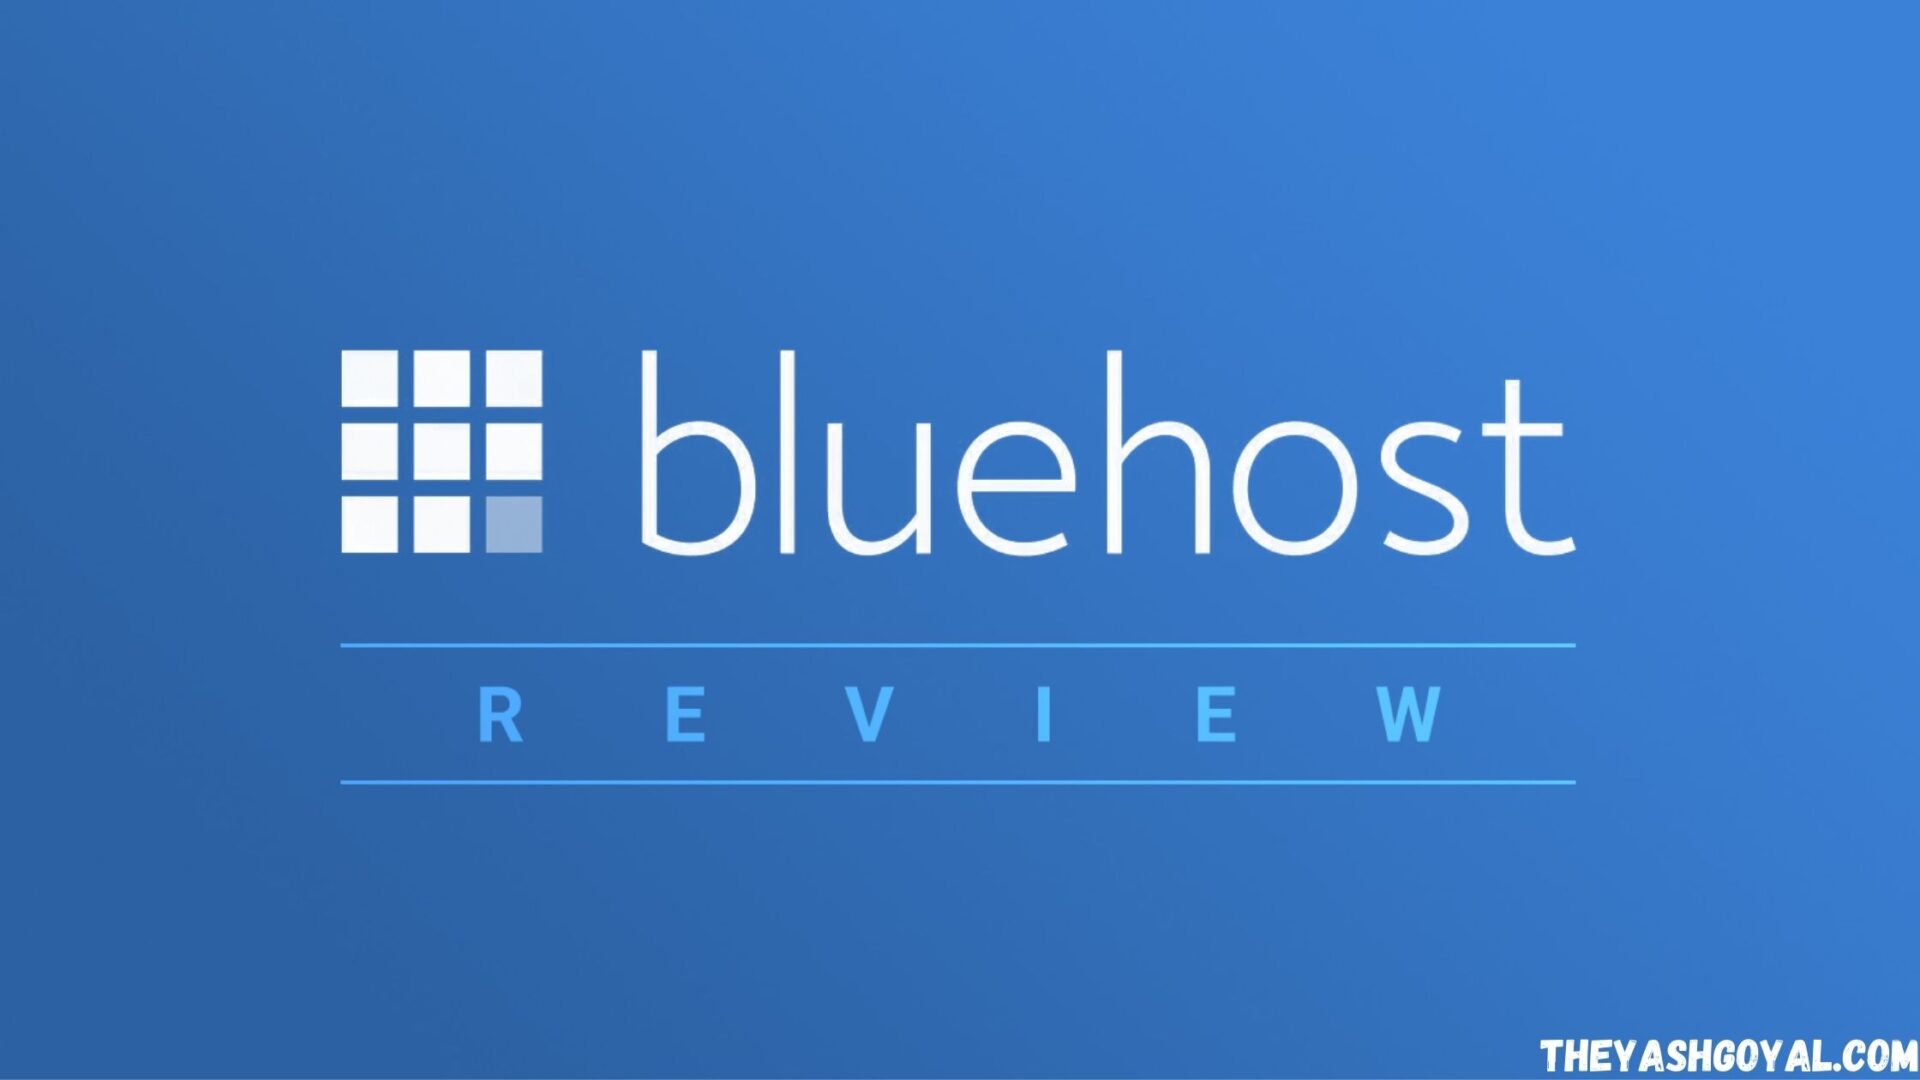 Bluehost Review ( Oct 2020 )- Why It Is Best?